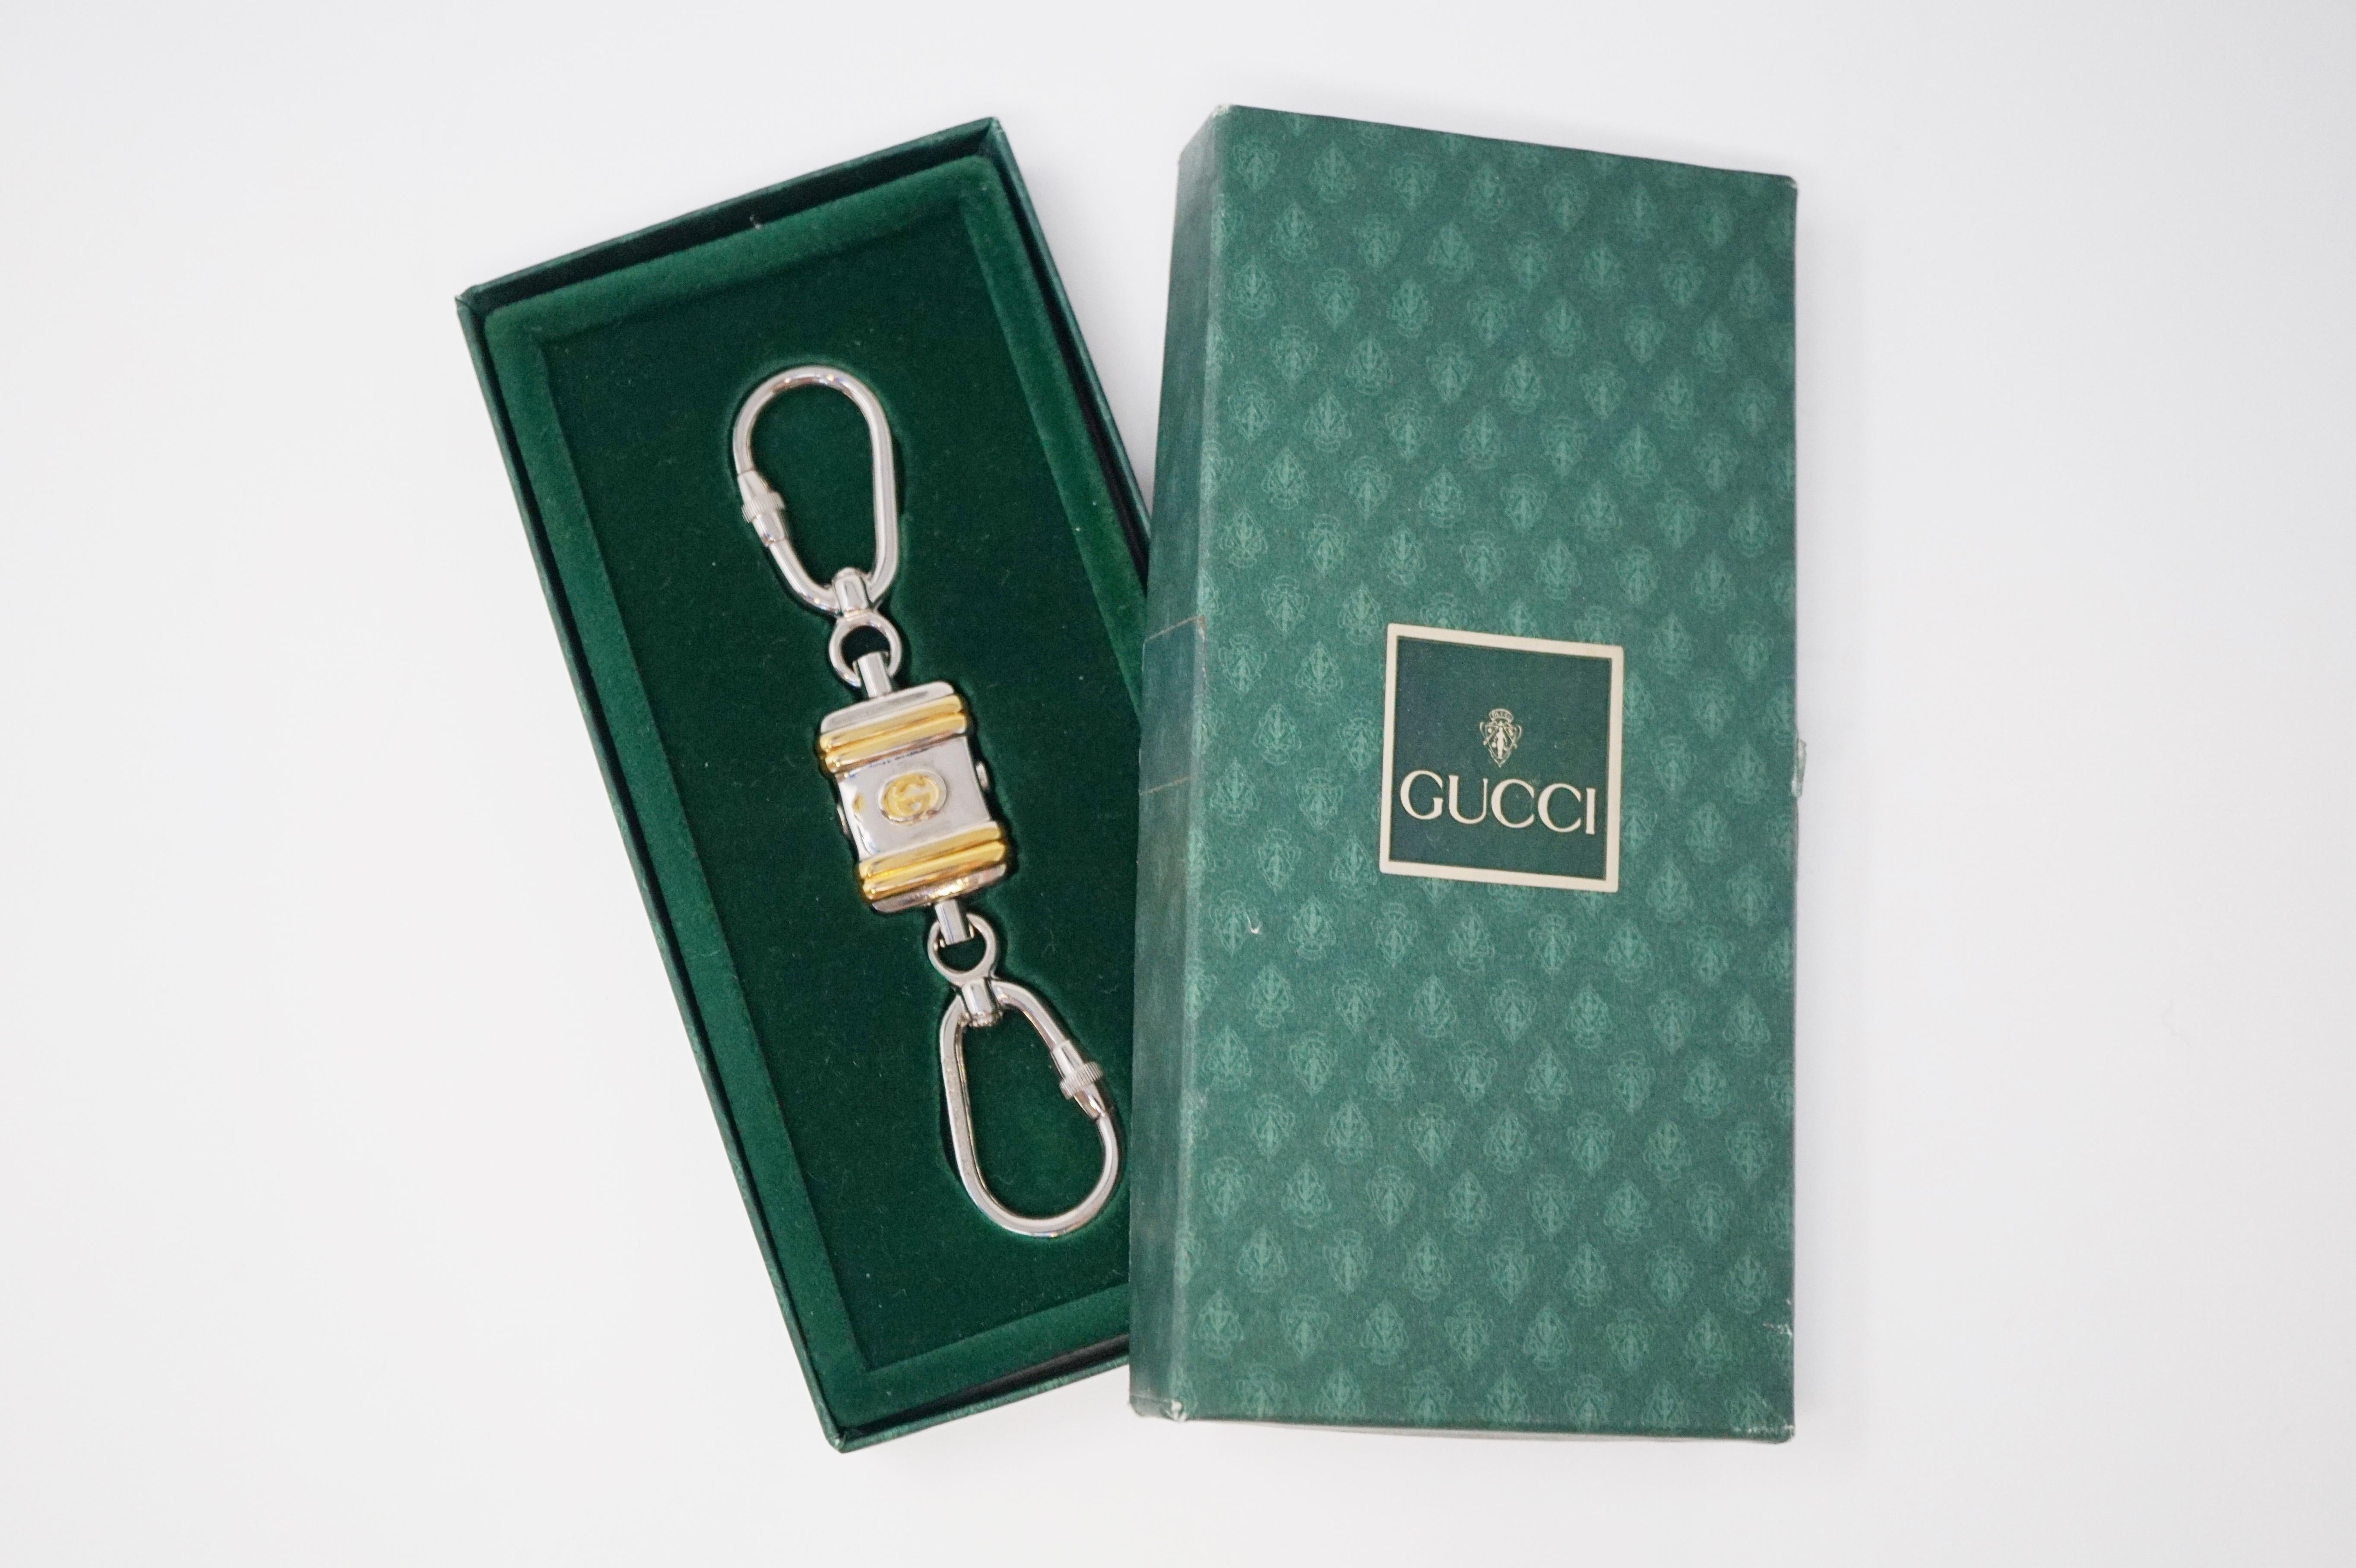 Gucci Logo Double Key Ring in Original Box, Made in Italy circa 1970, Signed 3